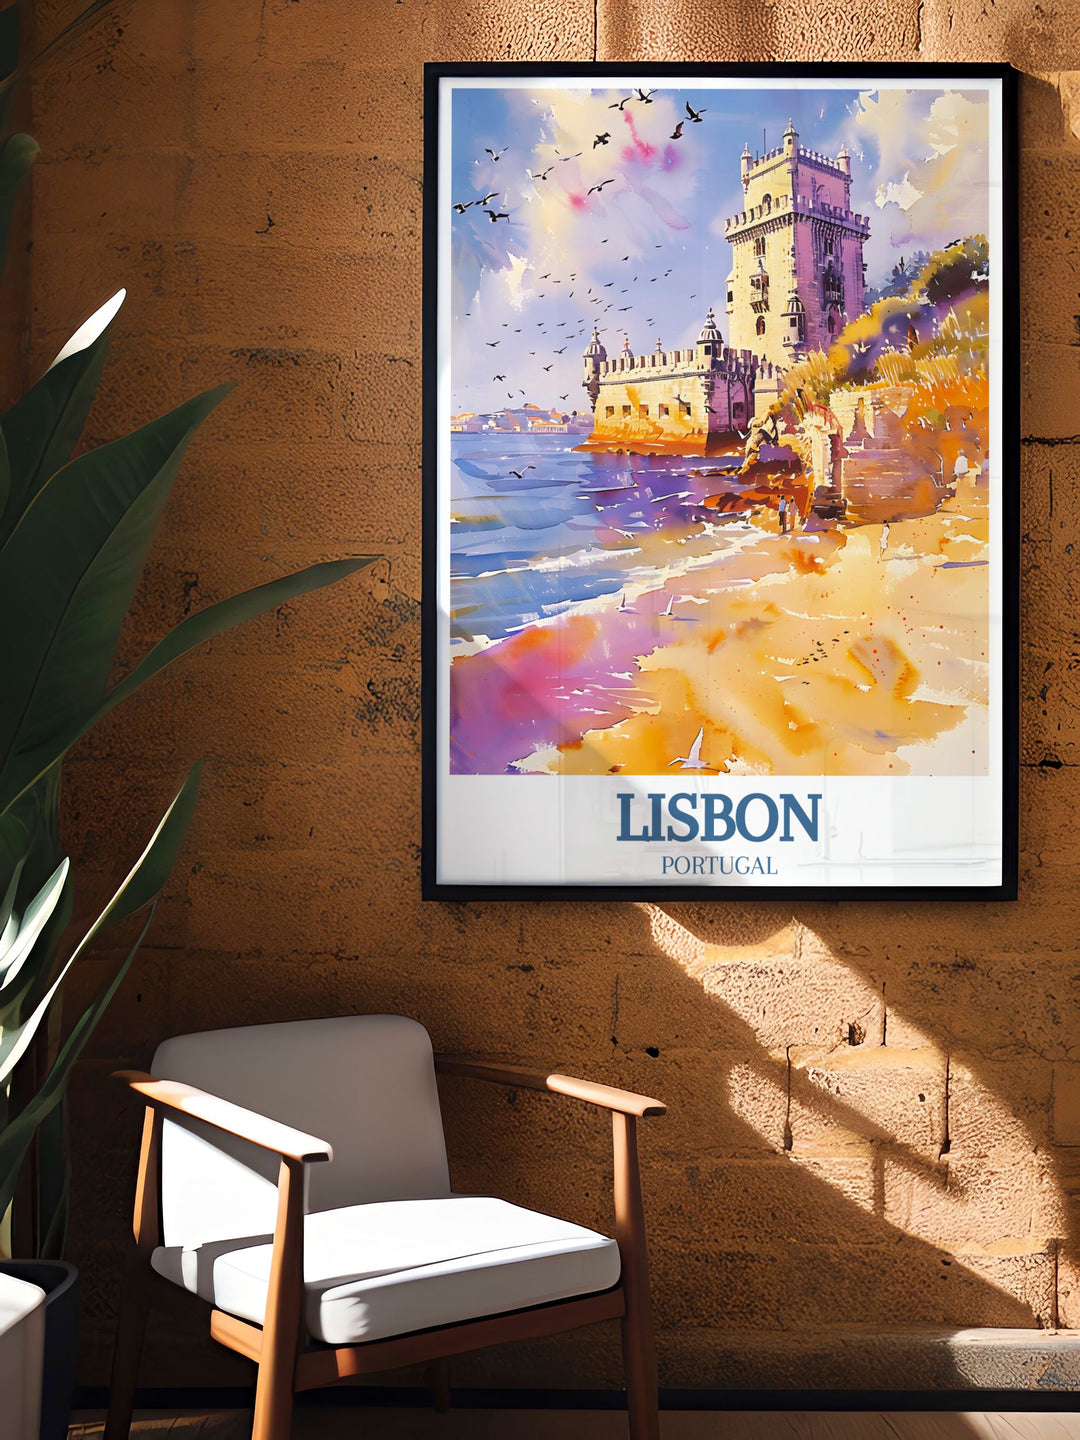 Immerse yourself in the breathtaking views of Belem Tower Tagus river with our Simple Travel Print a perfect addition to your collection of Portugal Travel Art showcasing the scenic beauty of Lisbon